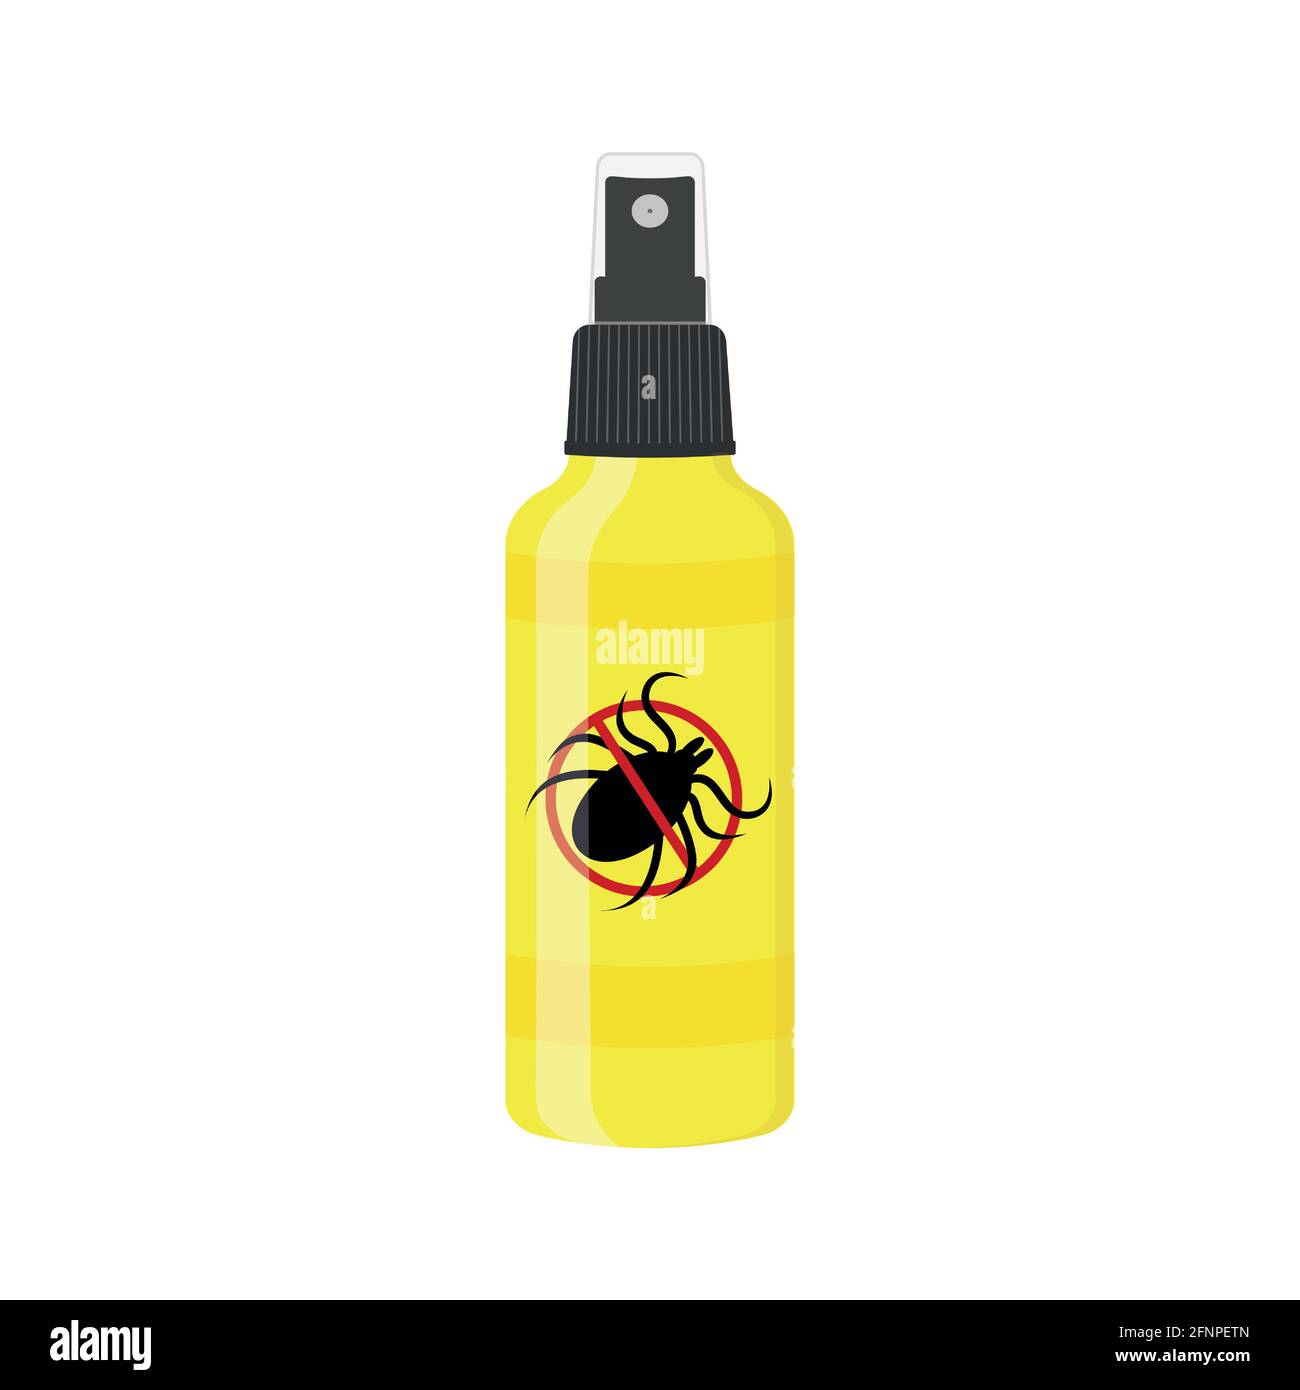 Mite spray icon isolated on white background. Repellent insect bottle with forbidden anti tick sign. Lyme disease prevention. Vector cartoon illustration. Stock Vector